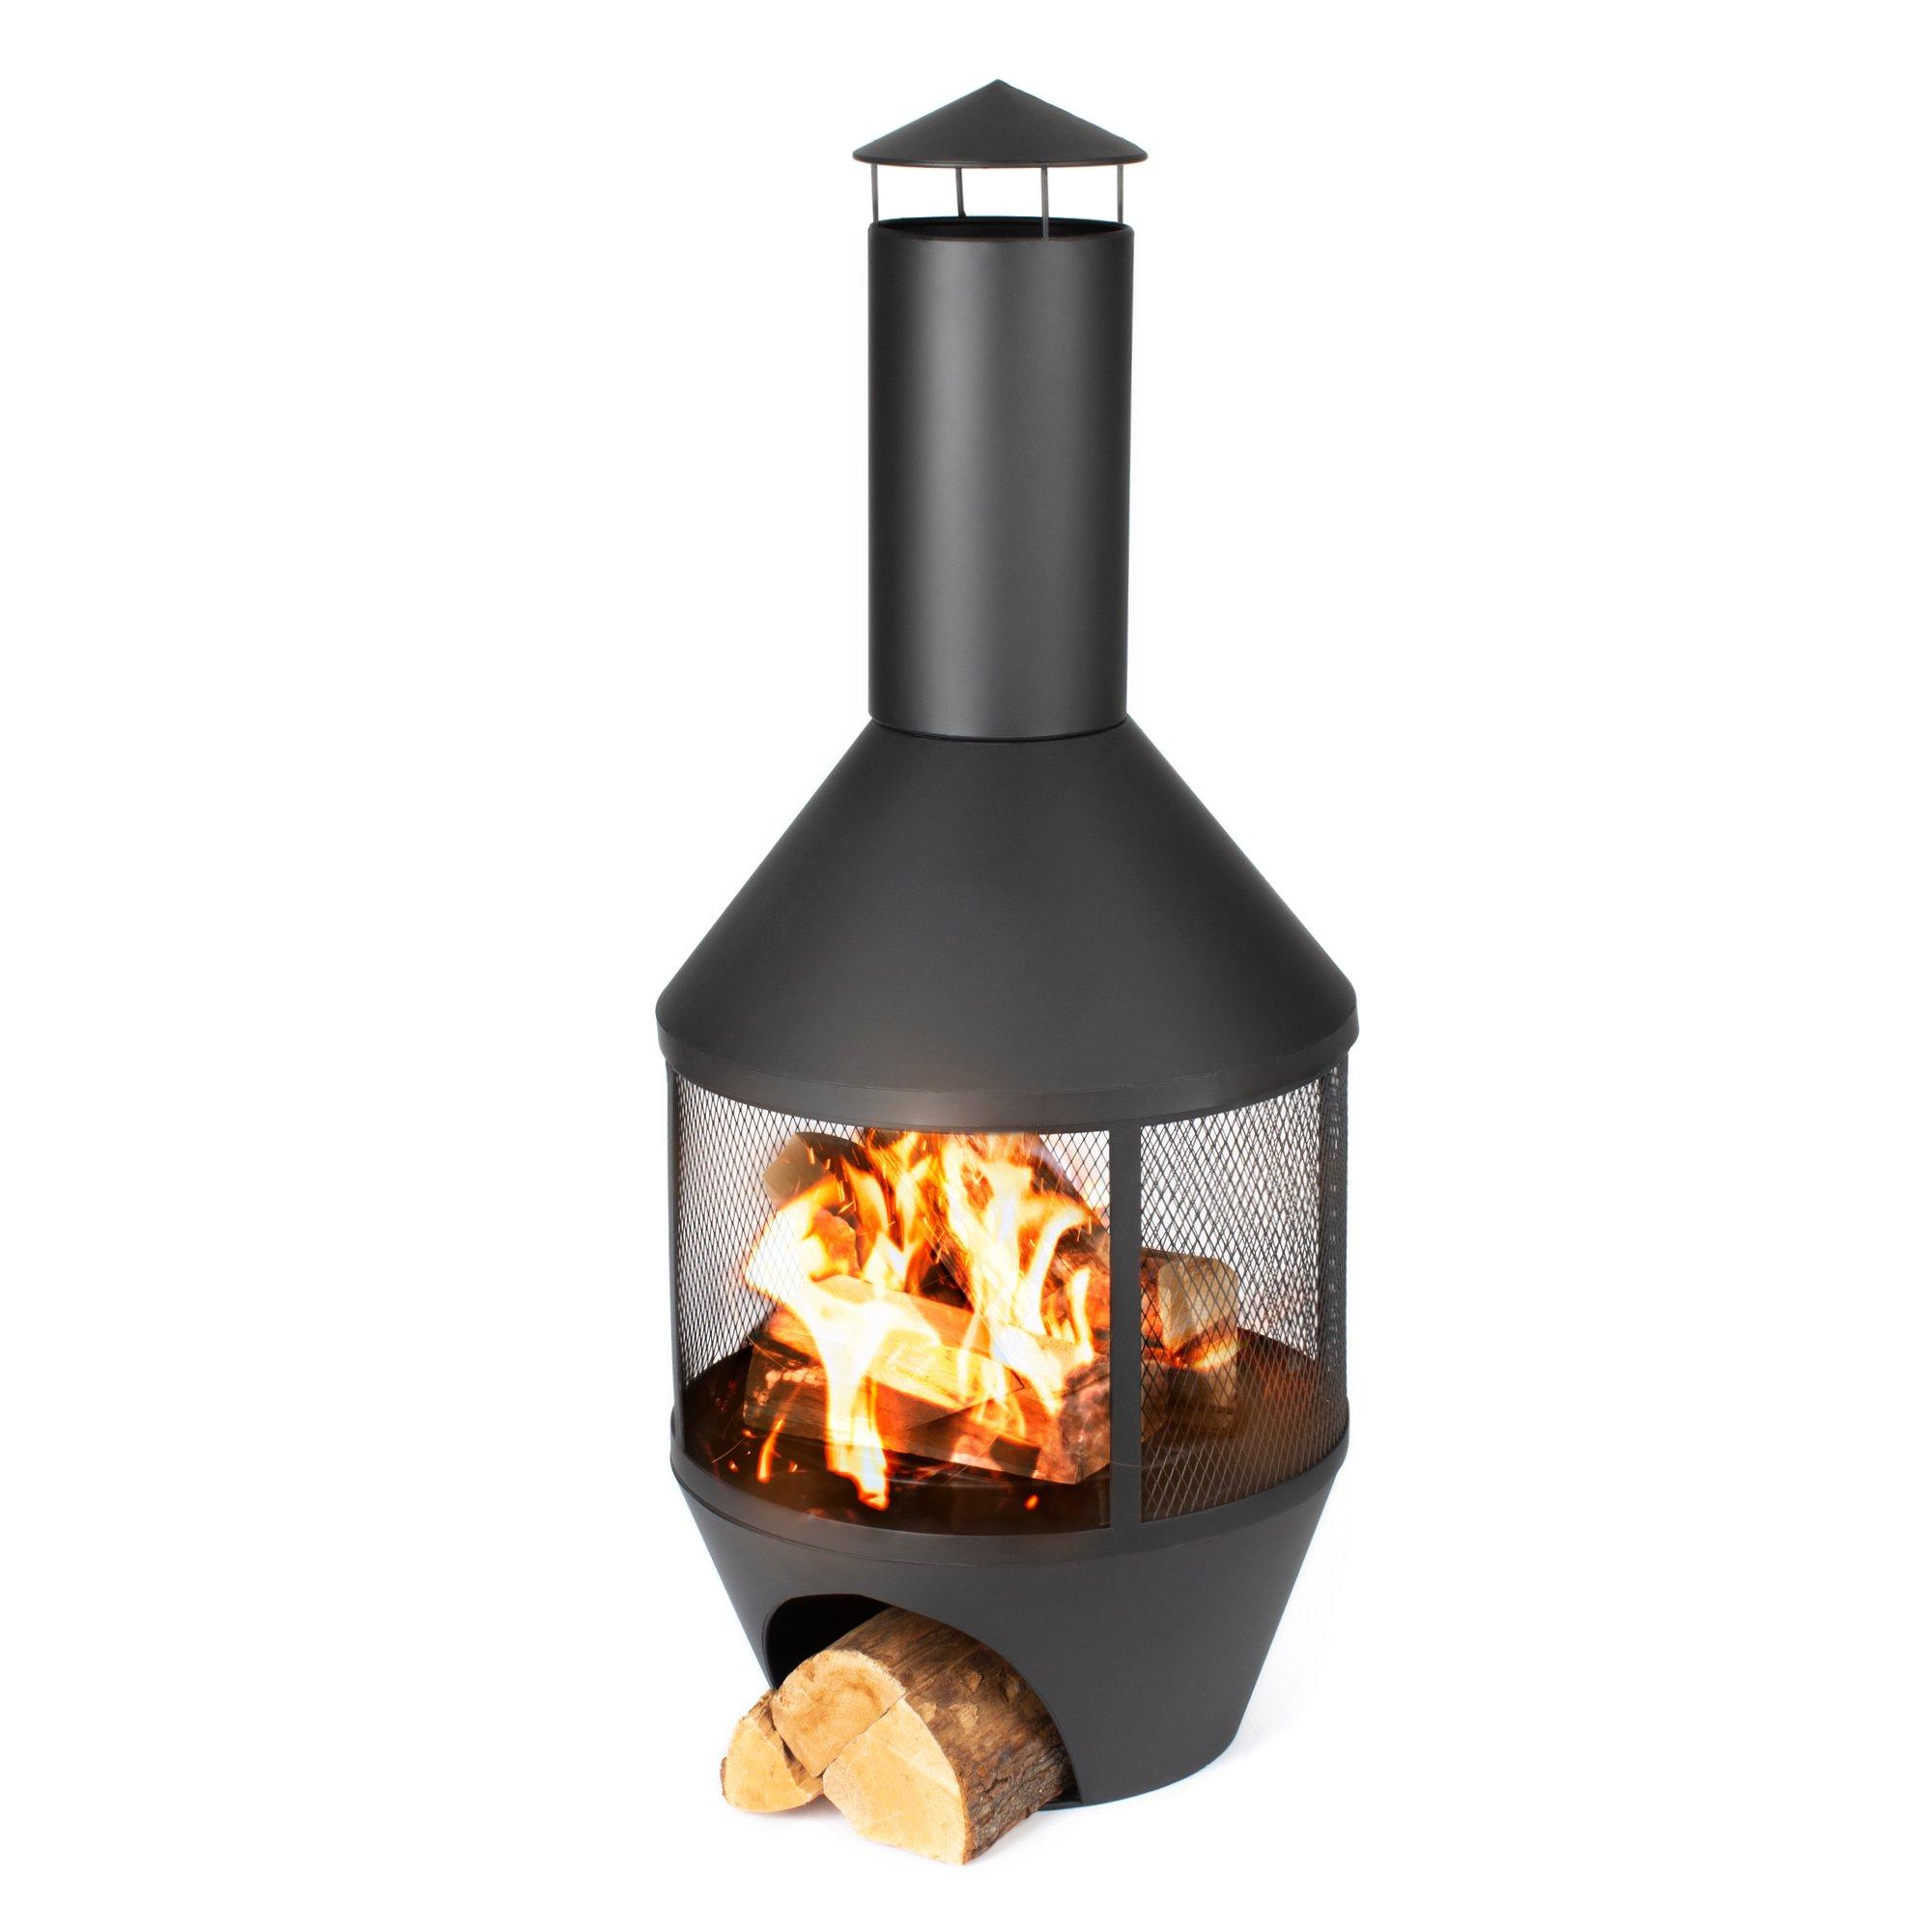 Stunning Camino Chiminea Fire Pit - Log Burner Barbecue Heater